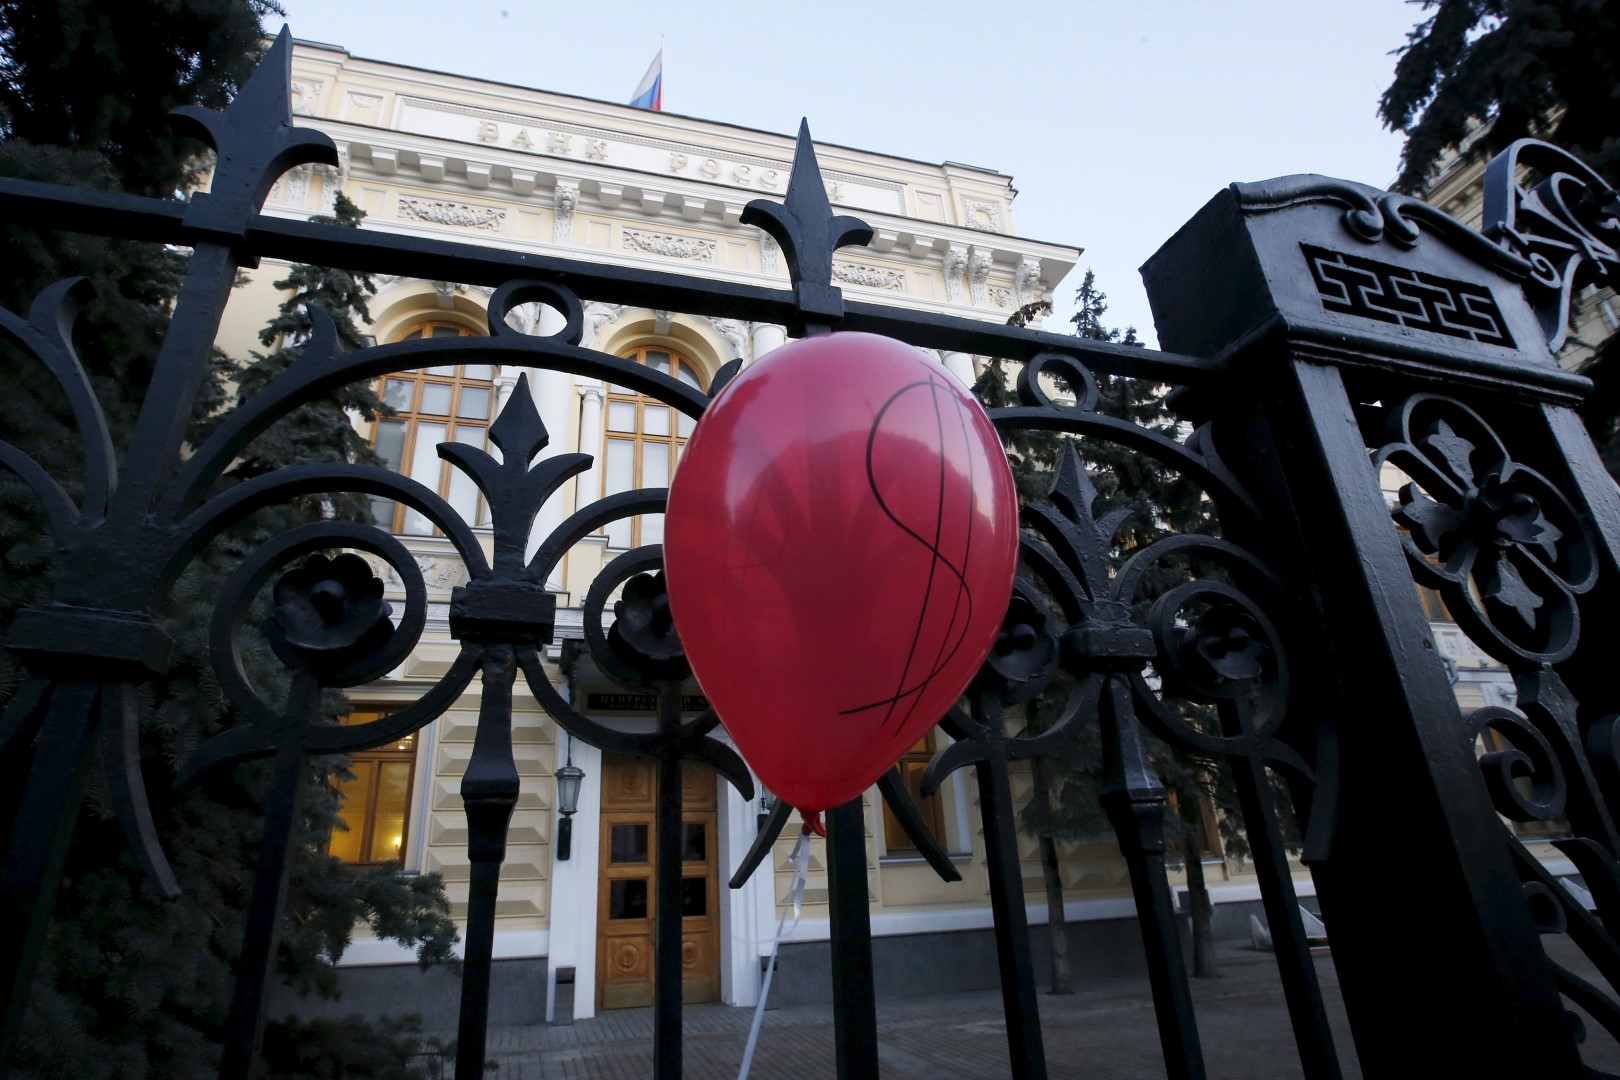 A balloon is seen during a rally of foreign currency mortgage holders near the Central Bank headquarters in central Moscow, Russia, February 8, 2016. REUTERS/Sergei Karpukhin - RTX2601D